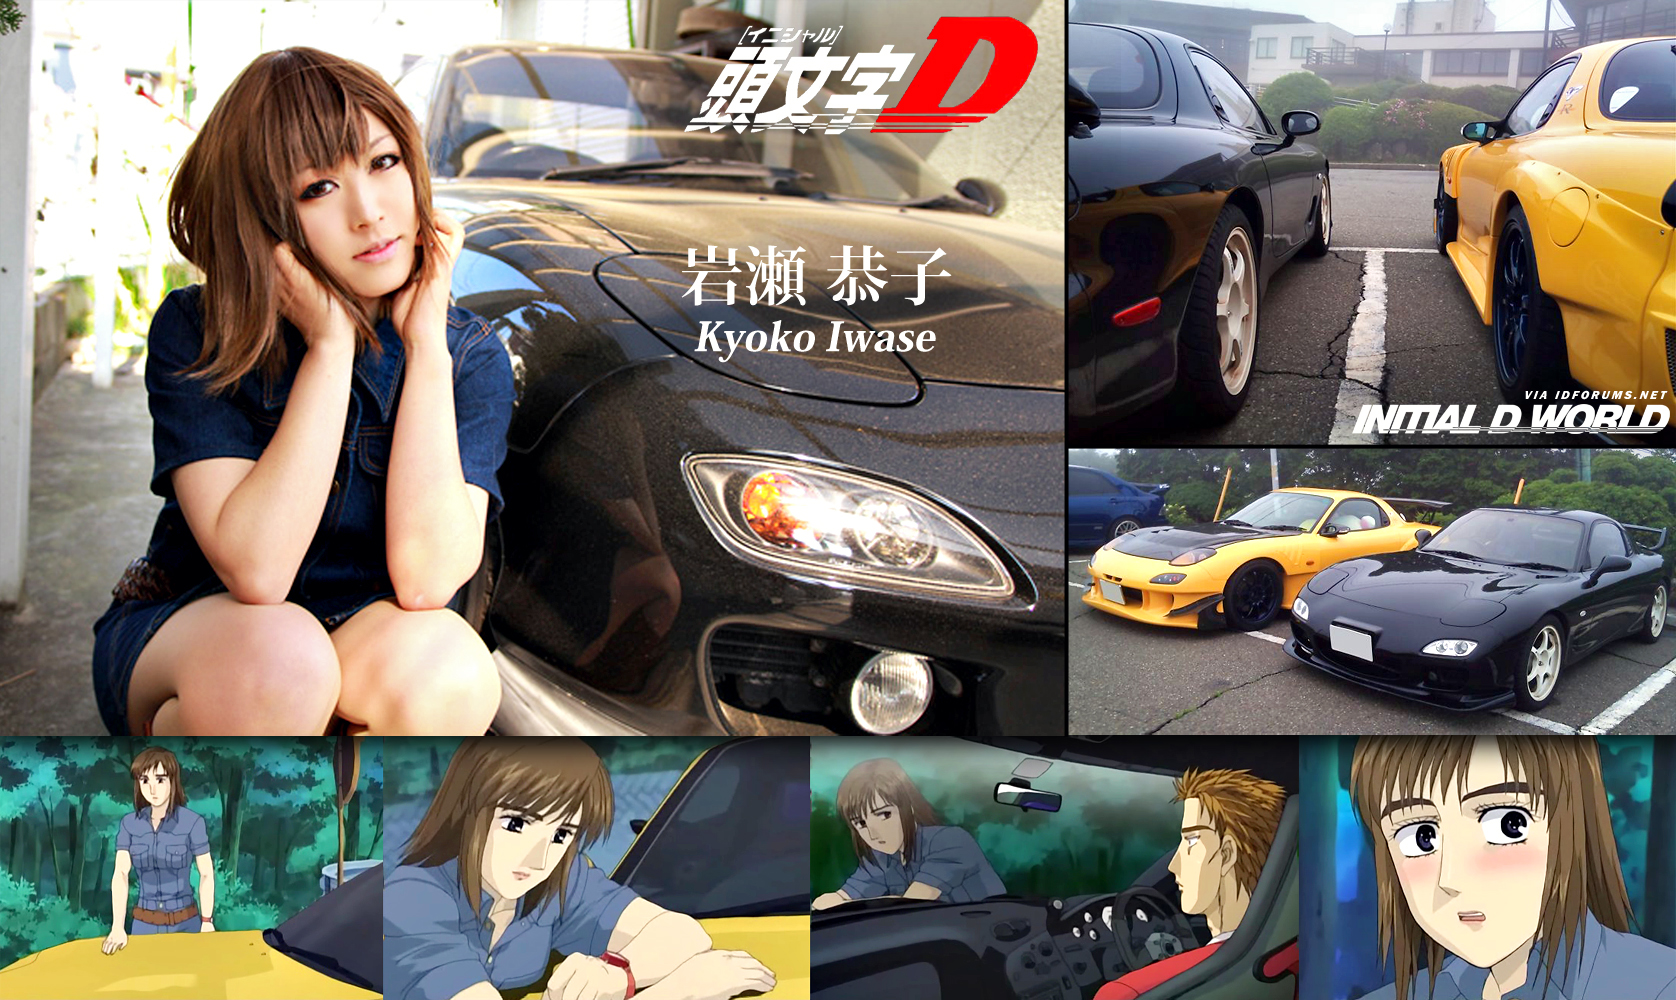 Initial D World Discussion Board / Forums Kyoko Iwase Cosplay. idforums.net...